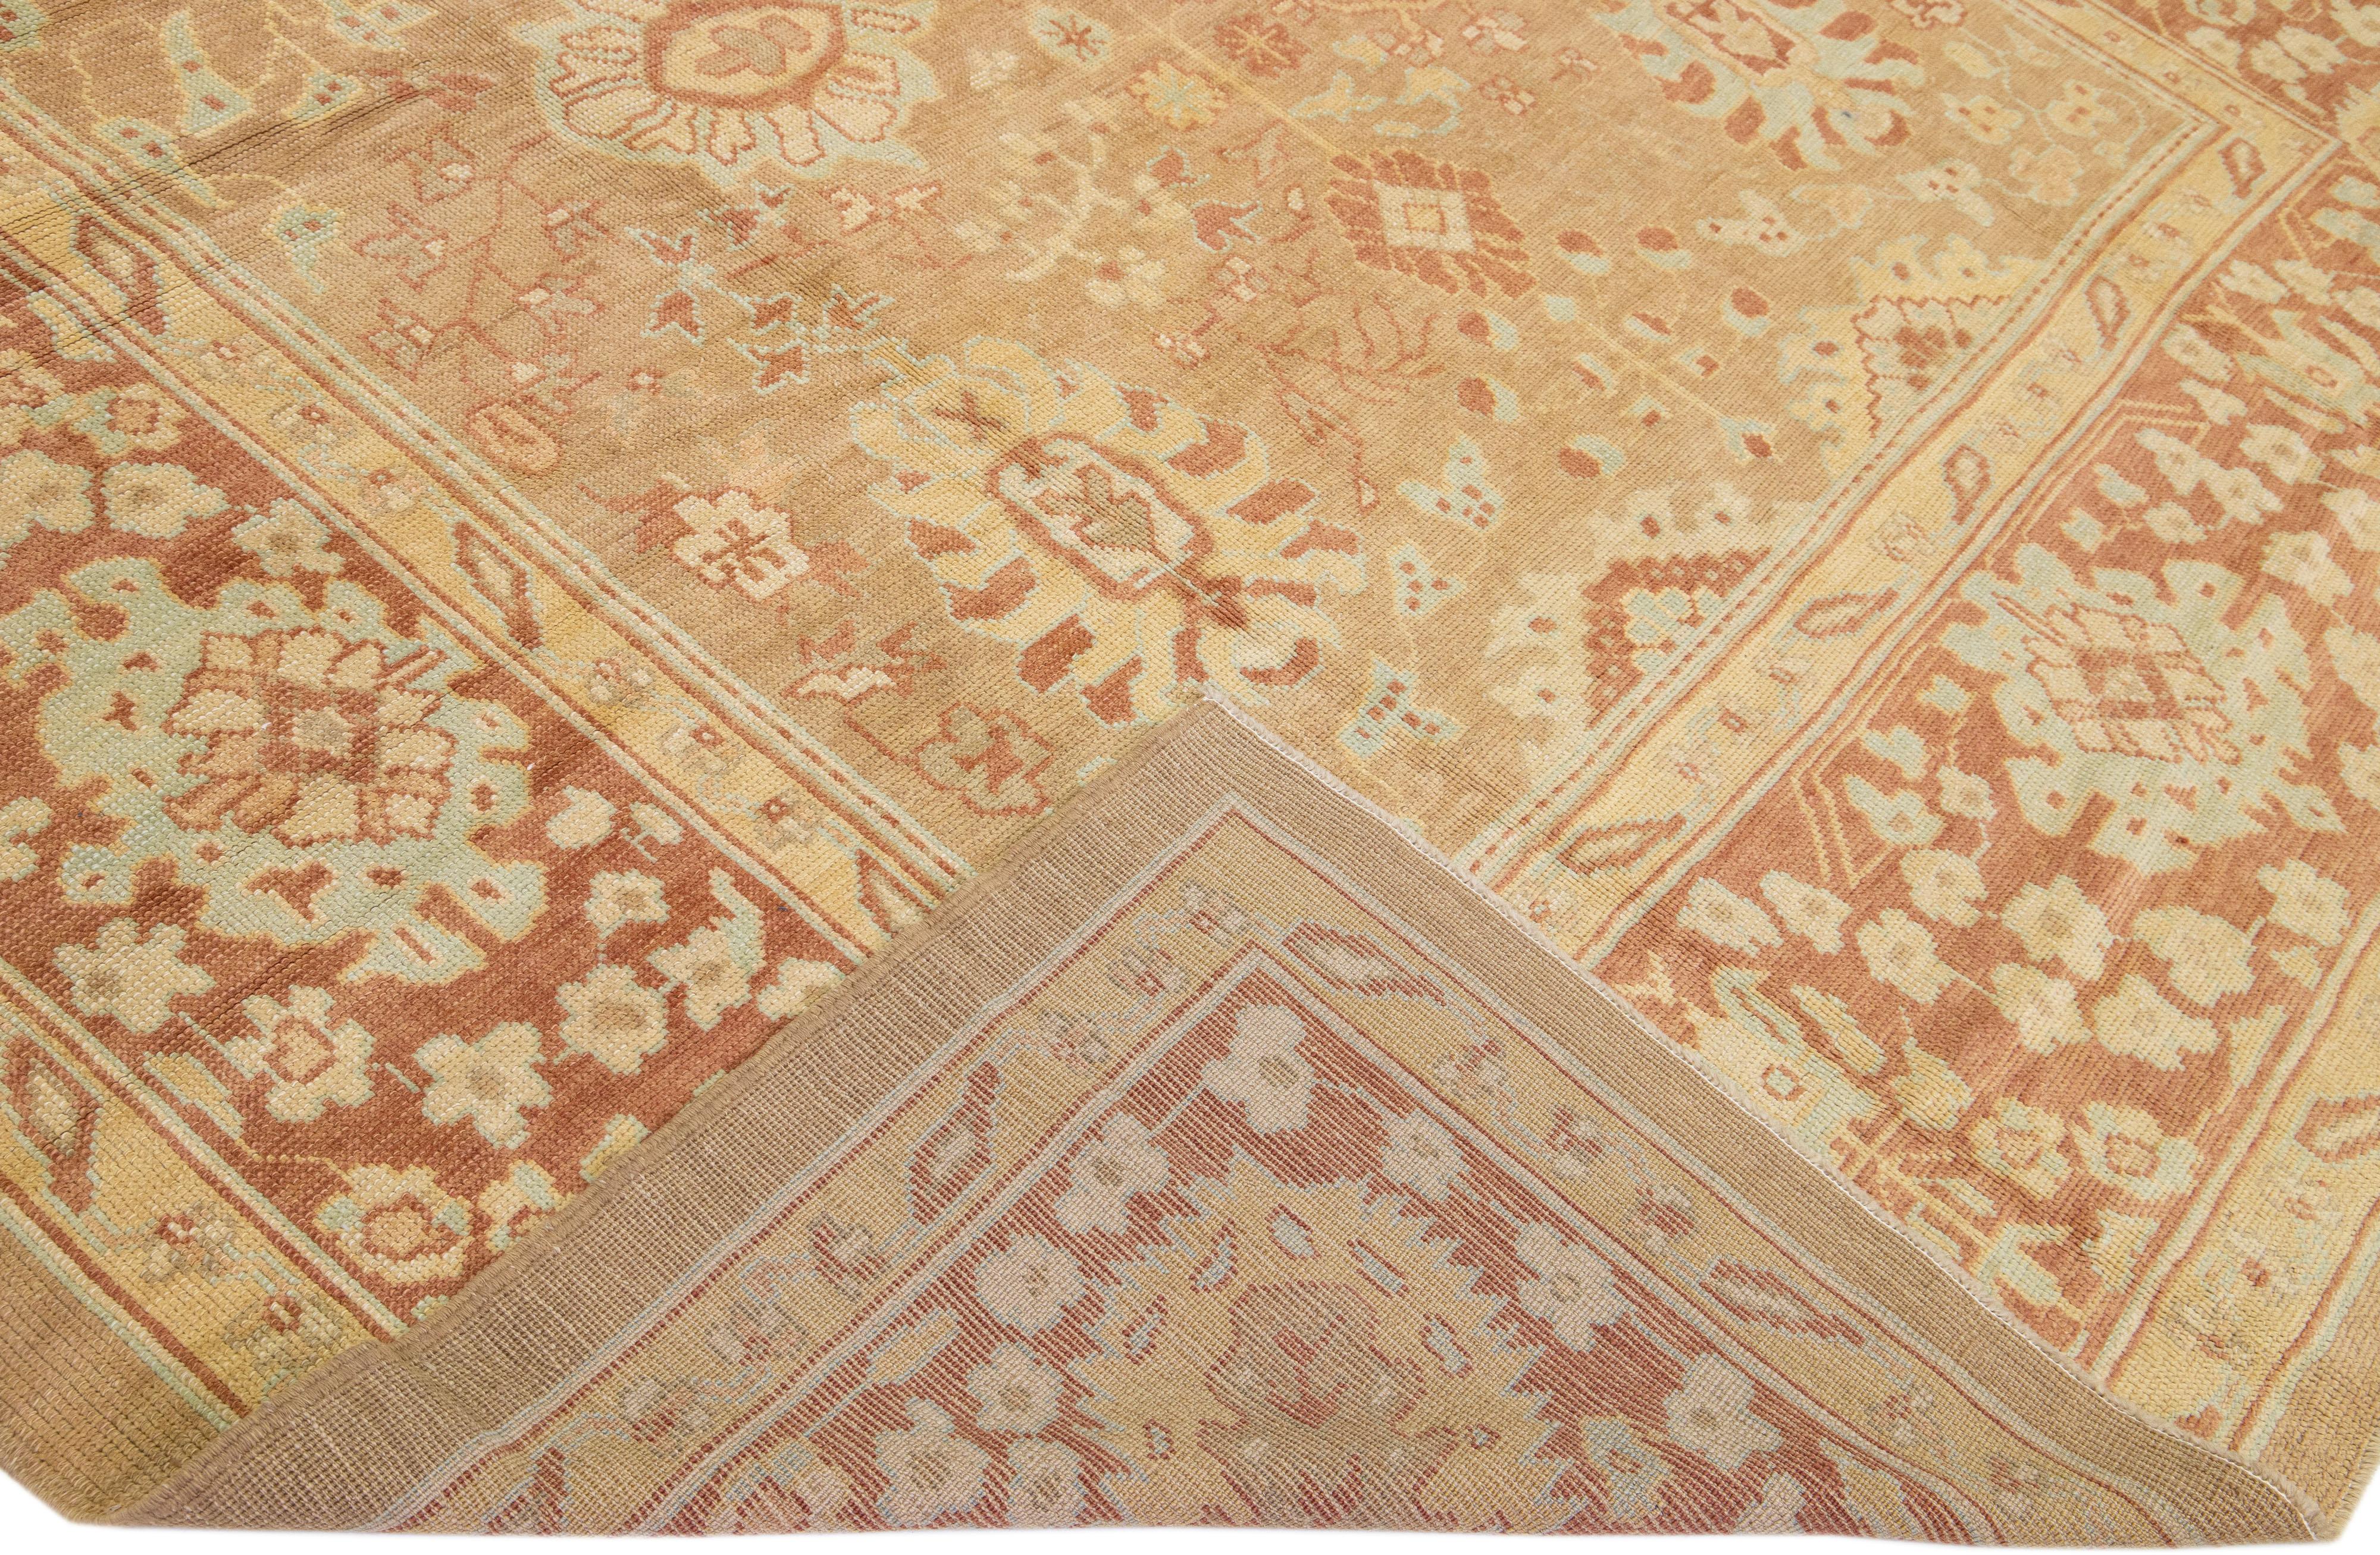 Beautiful modern Oushak hand-knotted wool rug with a tan color field. This Turkish Piece has a rusted-designed frame with blue and peach accent colors in a gorgeous all-over floral design.

This rug measures: 10'8